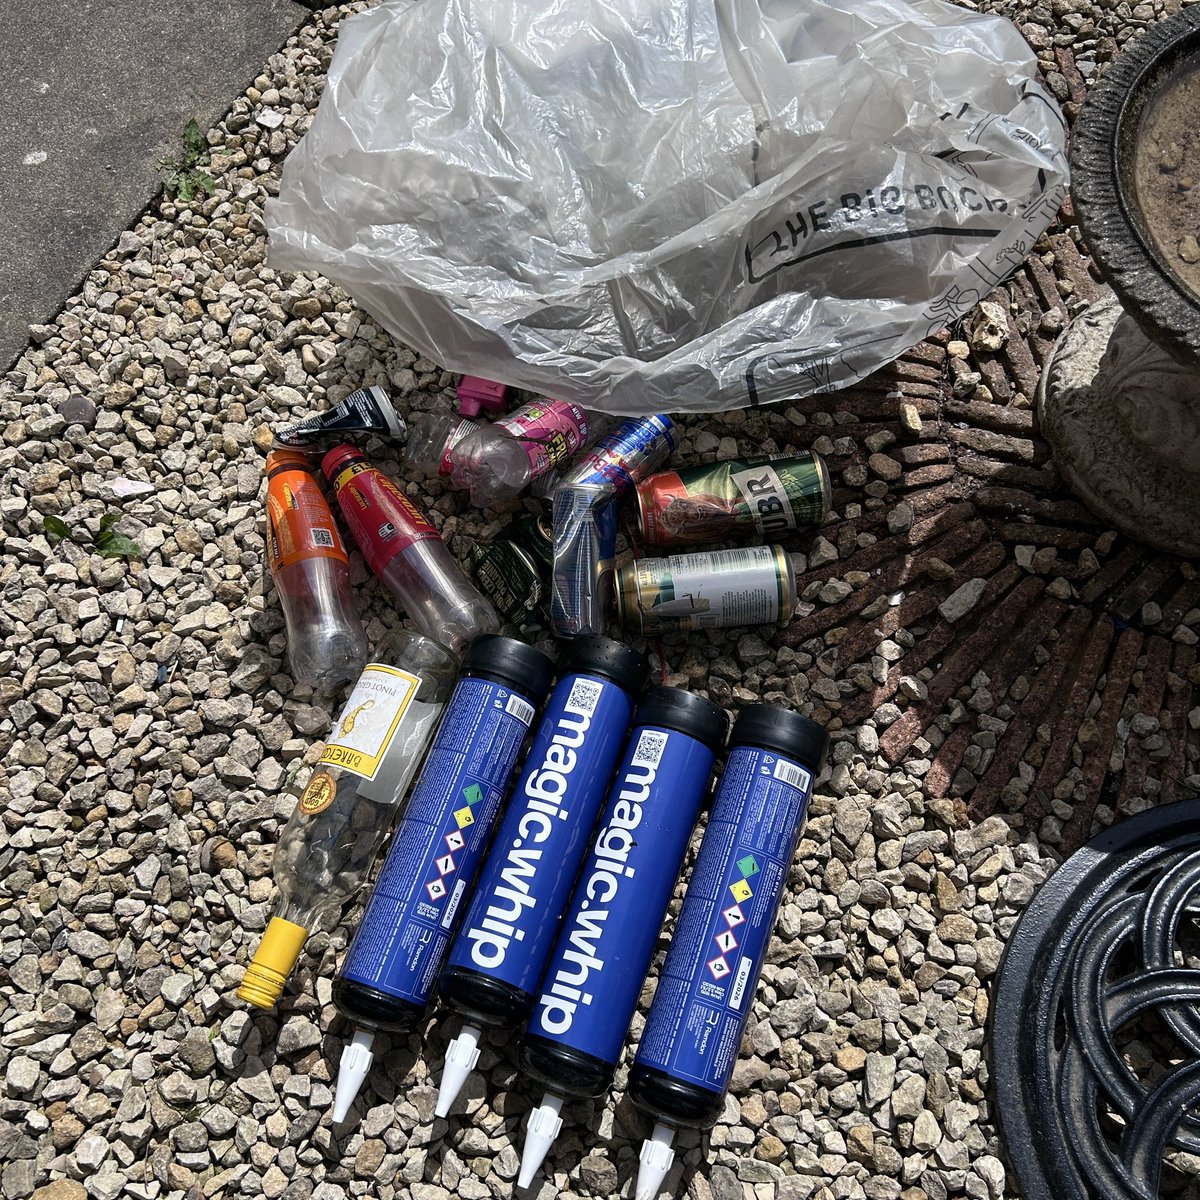 Today on my walk I took a litter picked and a hoop, 30 minutes of brisk walking……..  1 bag of rubbish, 4 nos, 3 vapes, 1 wine bottle, 10 cans and lots of plastic.

@AylesNews @AylesburyWombl1 @Rubyjones1926 #aylesbury #litter #keepbritaintidy #litterhero #litterpicking